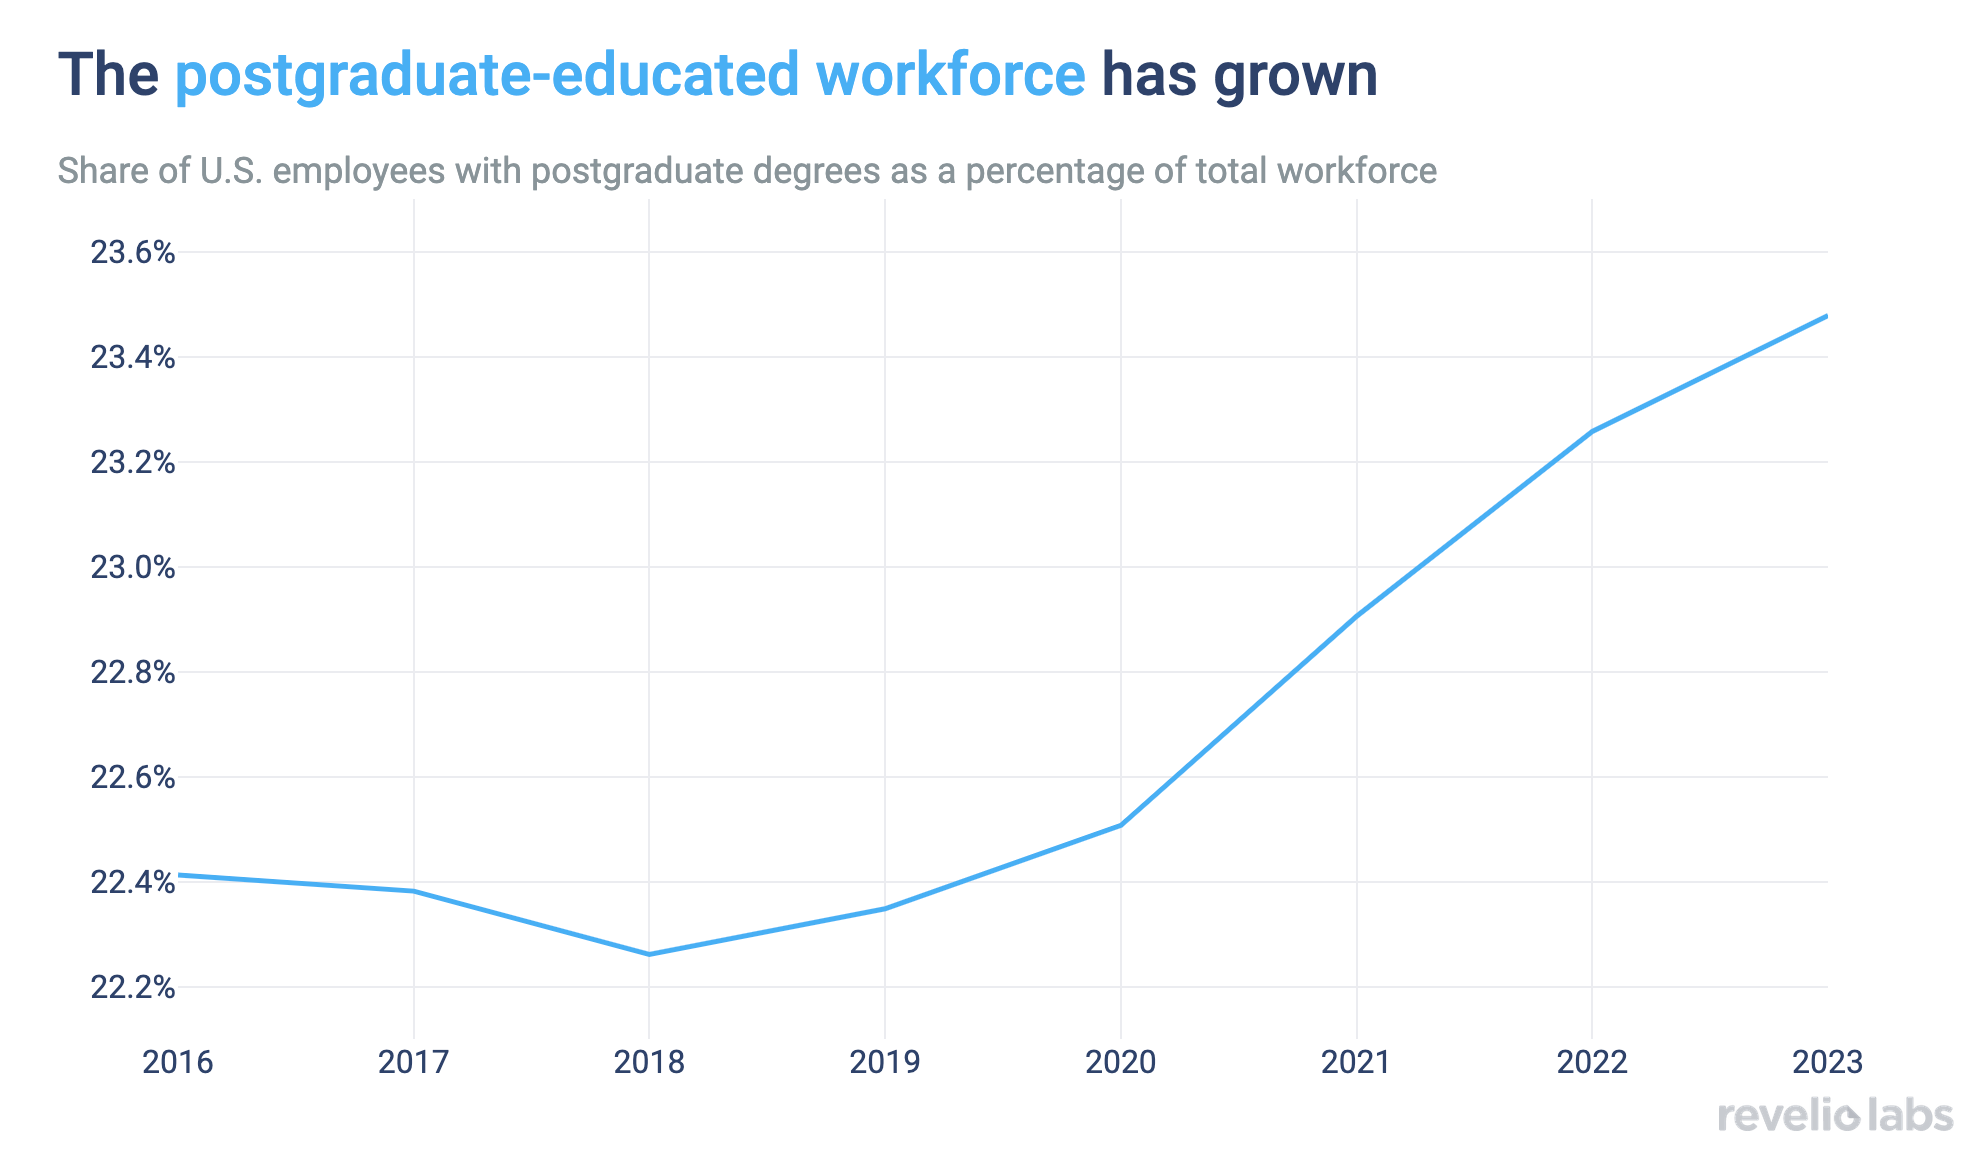 The share of employees with postgraduate degrees has been rising